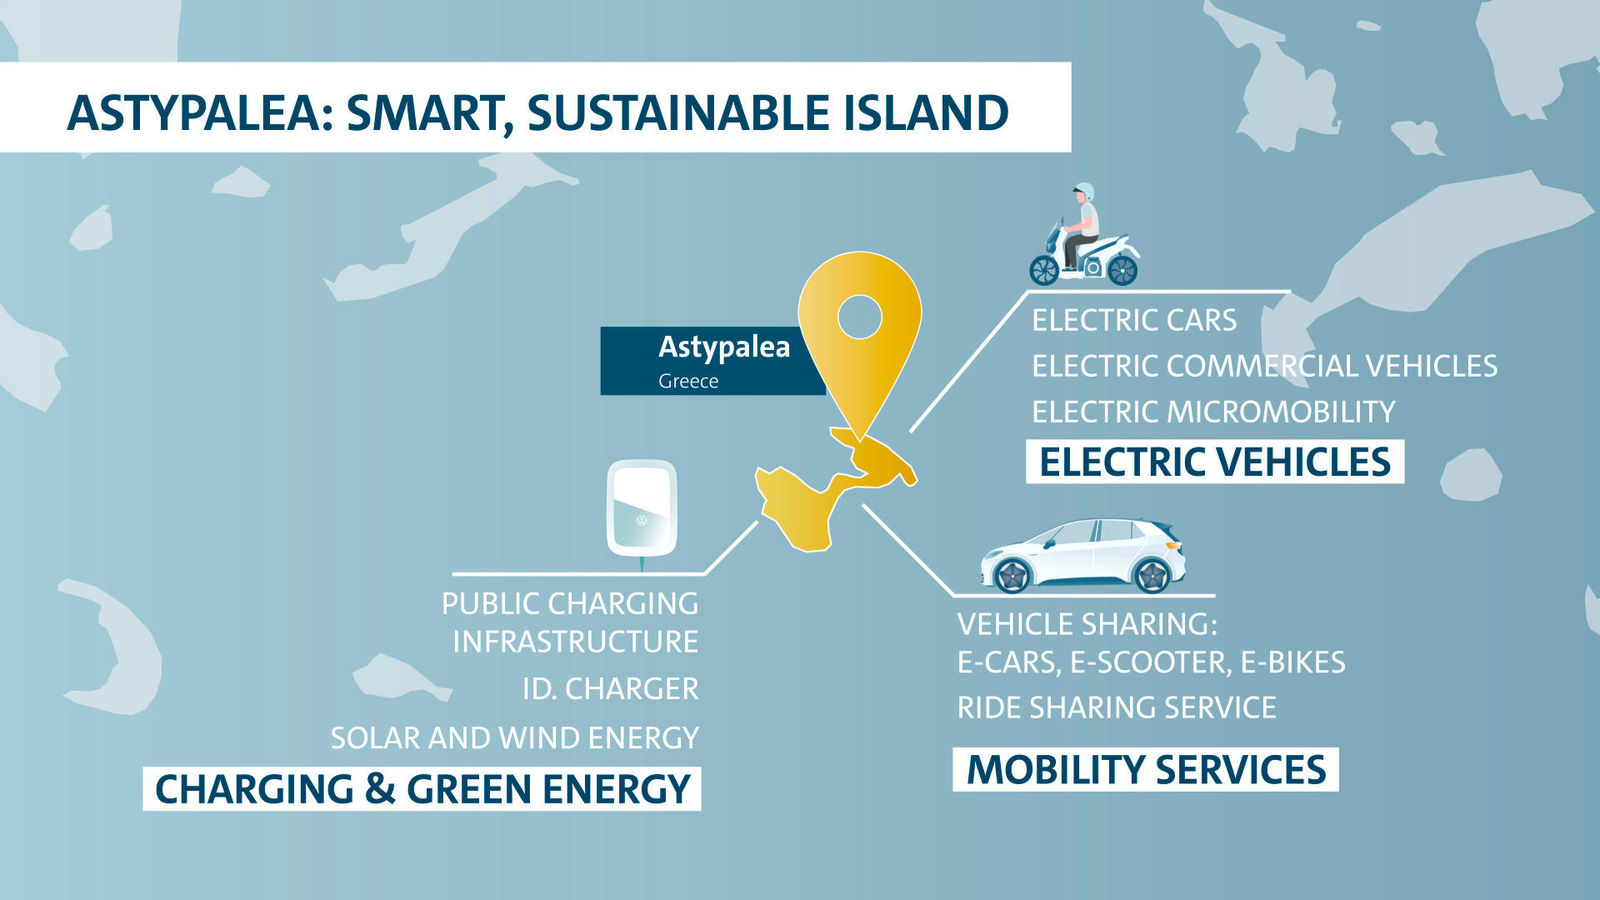 Volkswagen Group and Greece to create model island for climate-neutral mobility